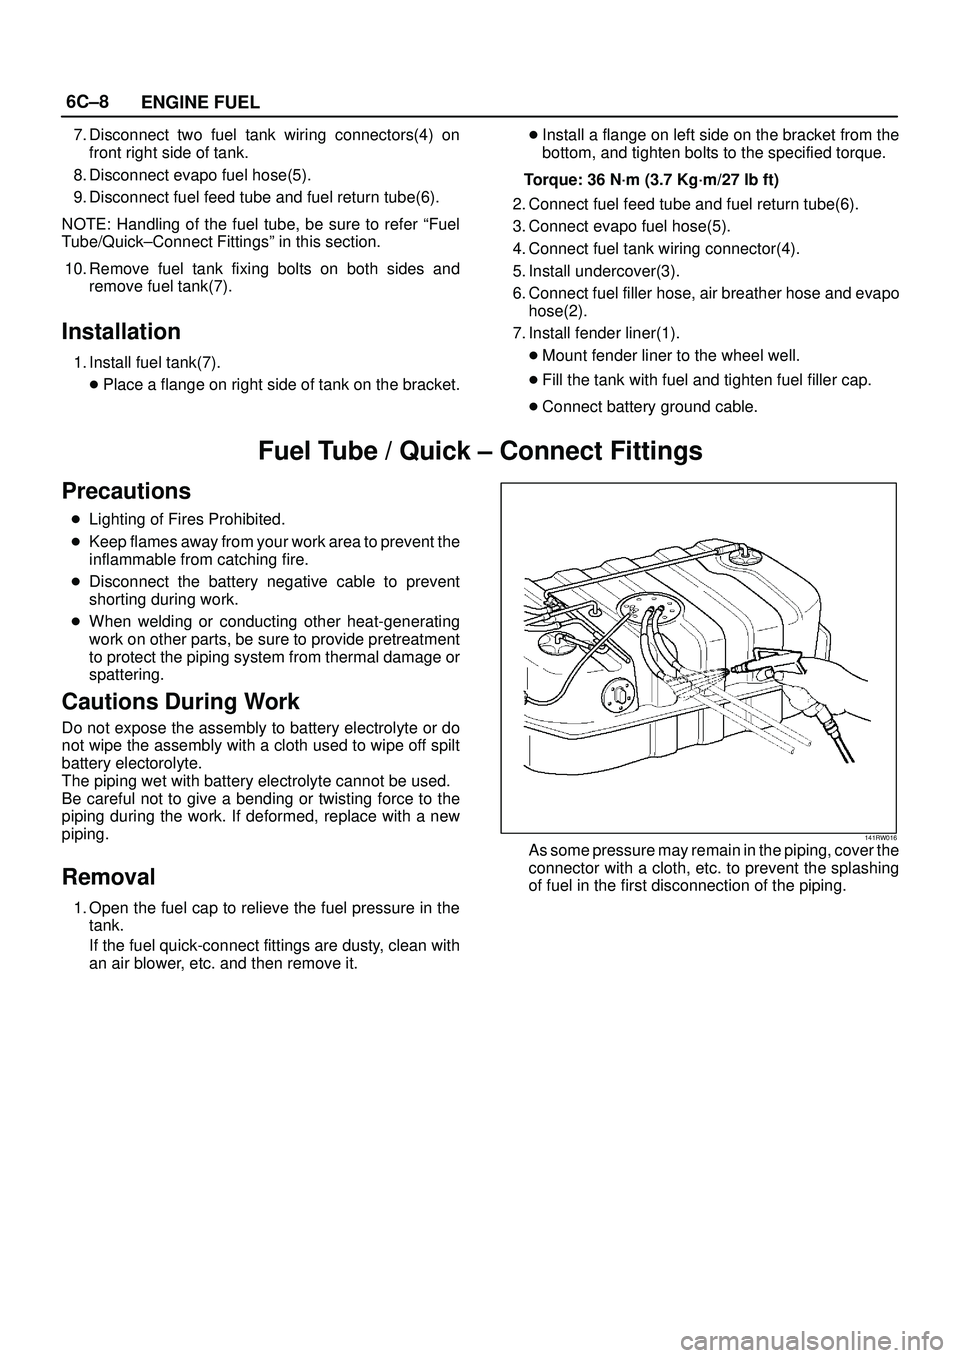 ISUZU TROOPER 1998  Service Service Manual 6C±8
ENGINE FUEL
7. Disconnect two fuel tank wiring connectors(4) on
front right side of tank.
8. Disconnect evapo fuel hose(5).
9. Disconnect fuel feed tube and fuel return tube(6).
NOTE: Handling o